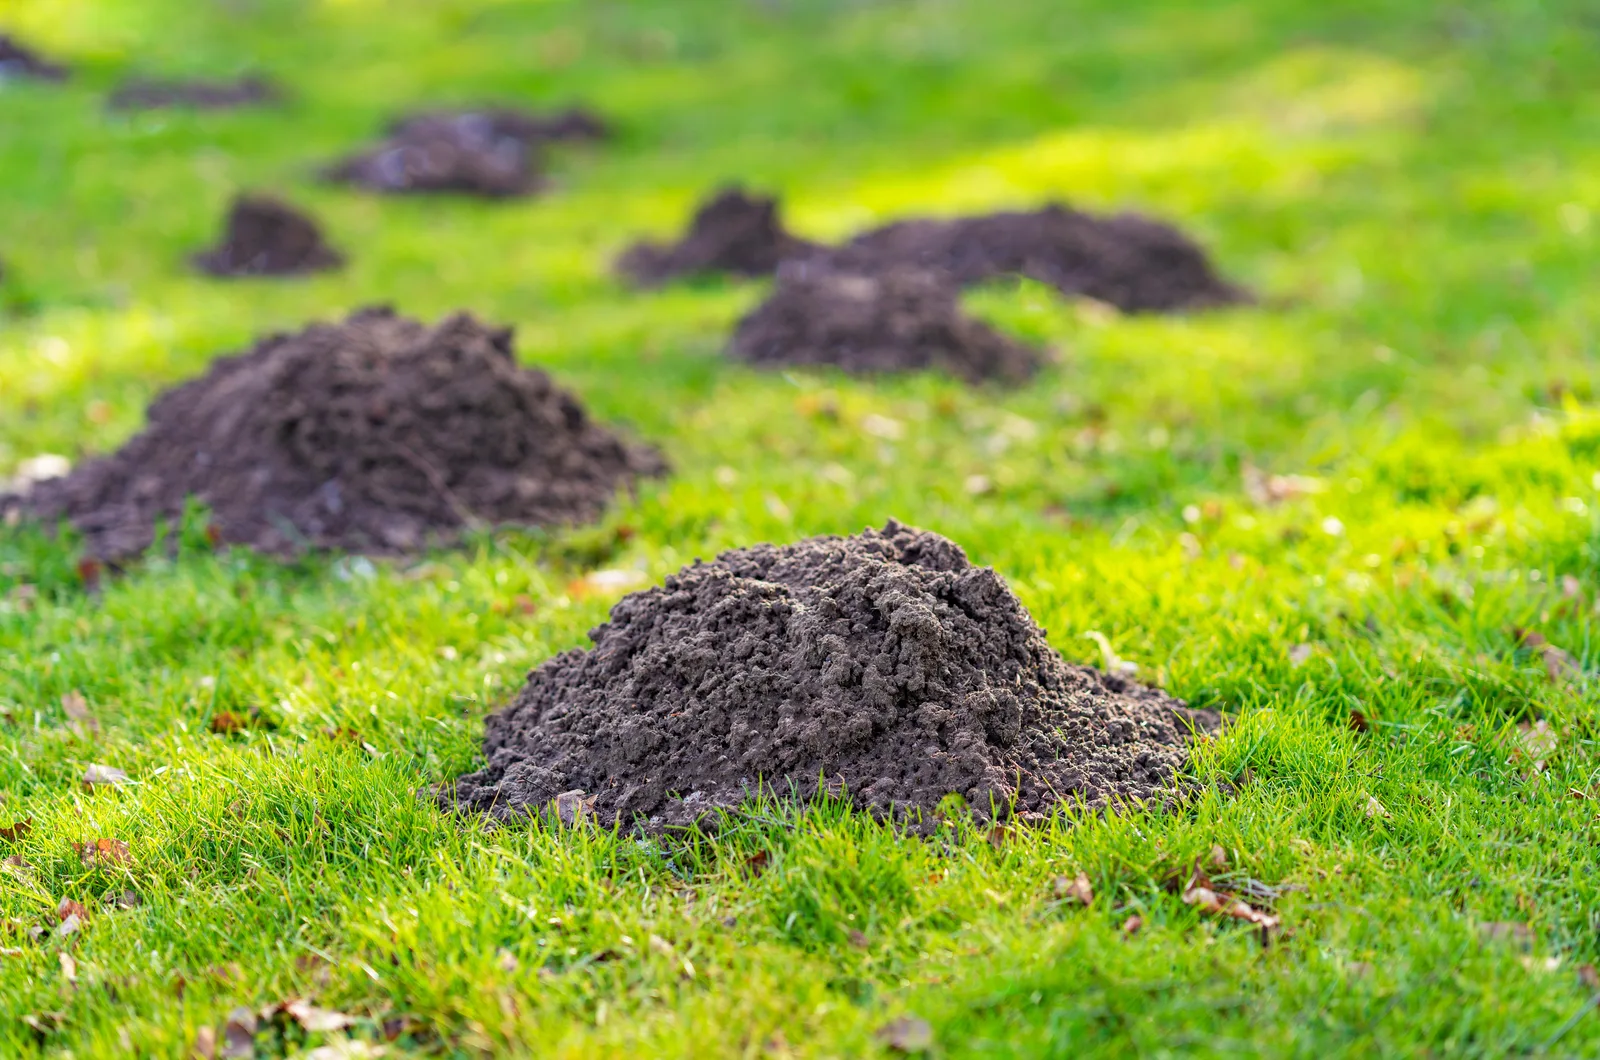 Lawn in the garden with mole hills